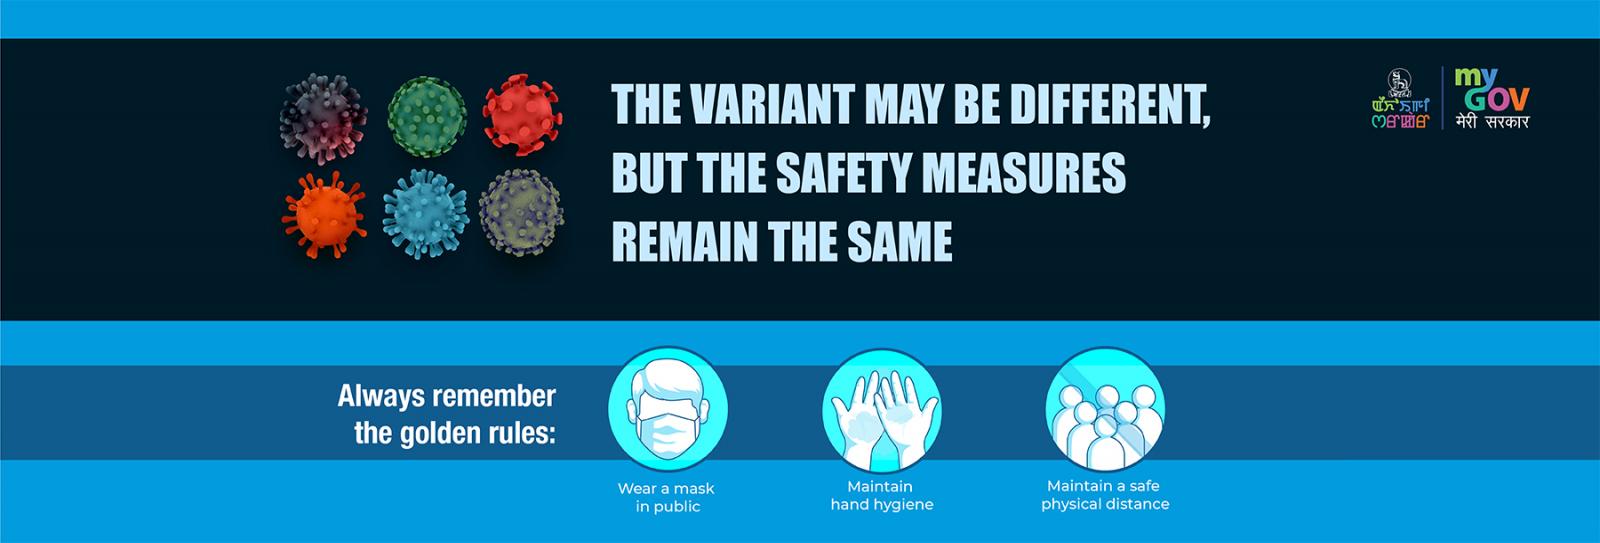 The variant may be different, but the safety measures remain the same